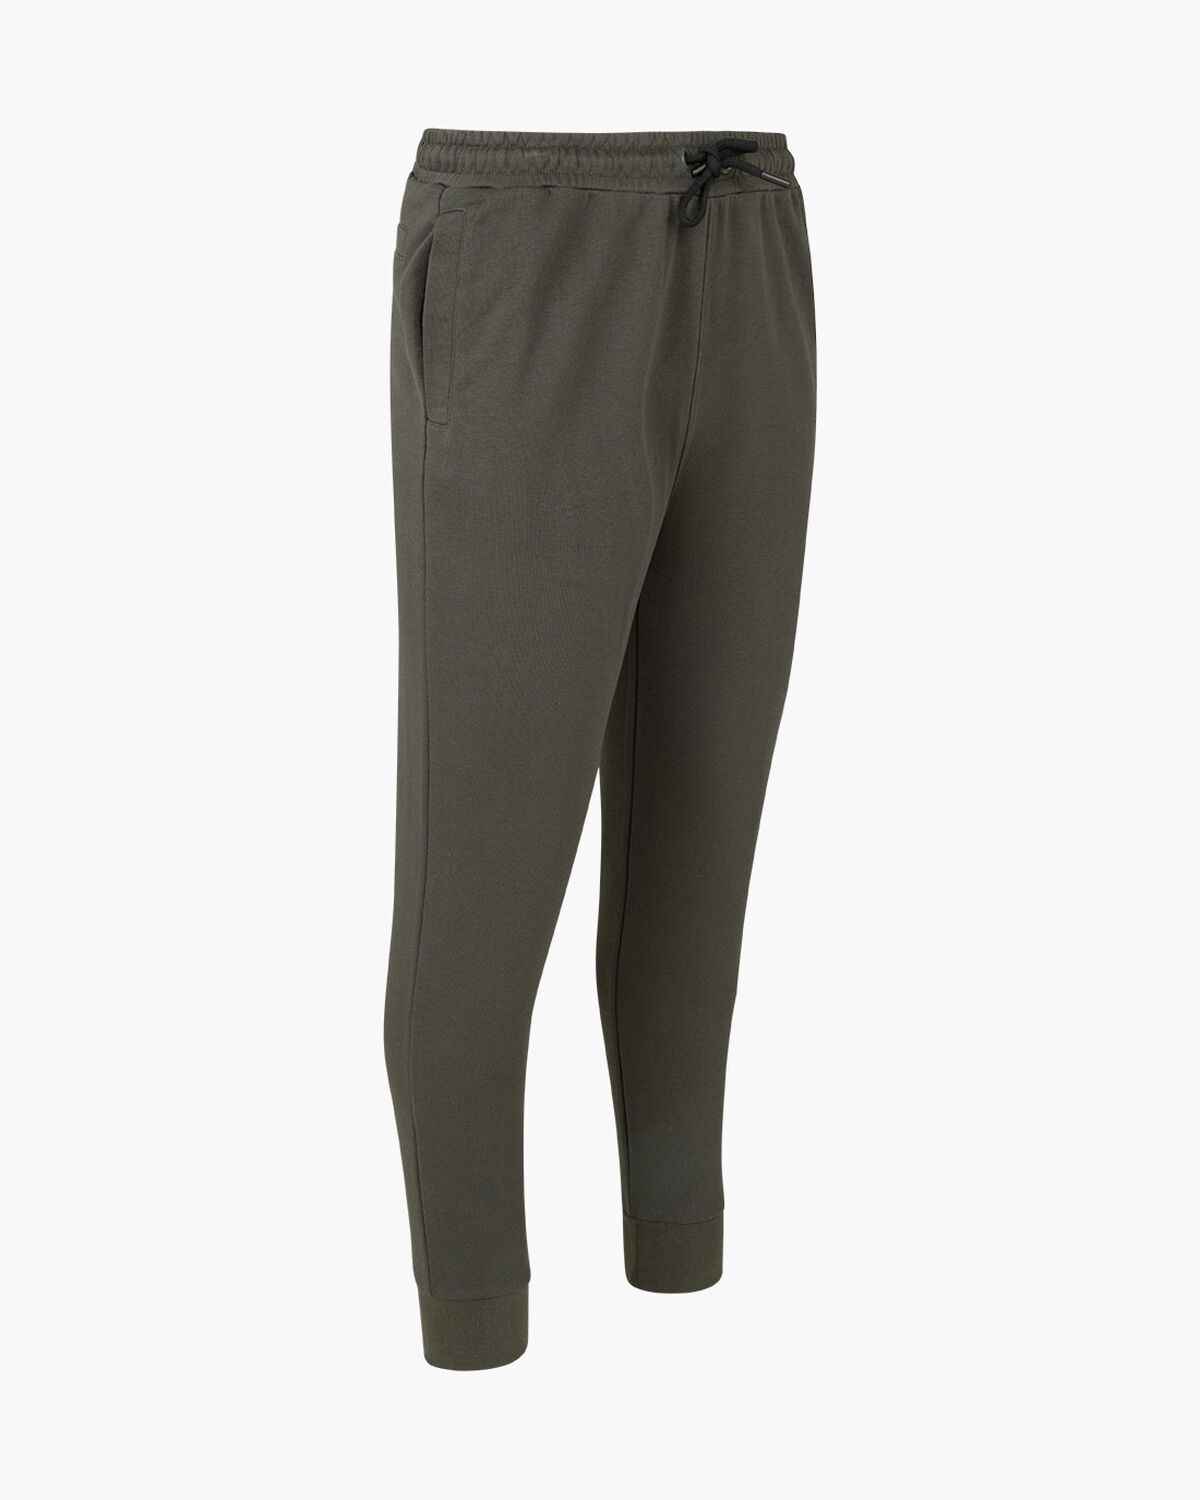 Do Pant - 80% Cotton / 20% Polyester, Army green, hi-res